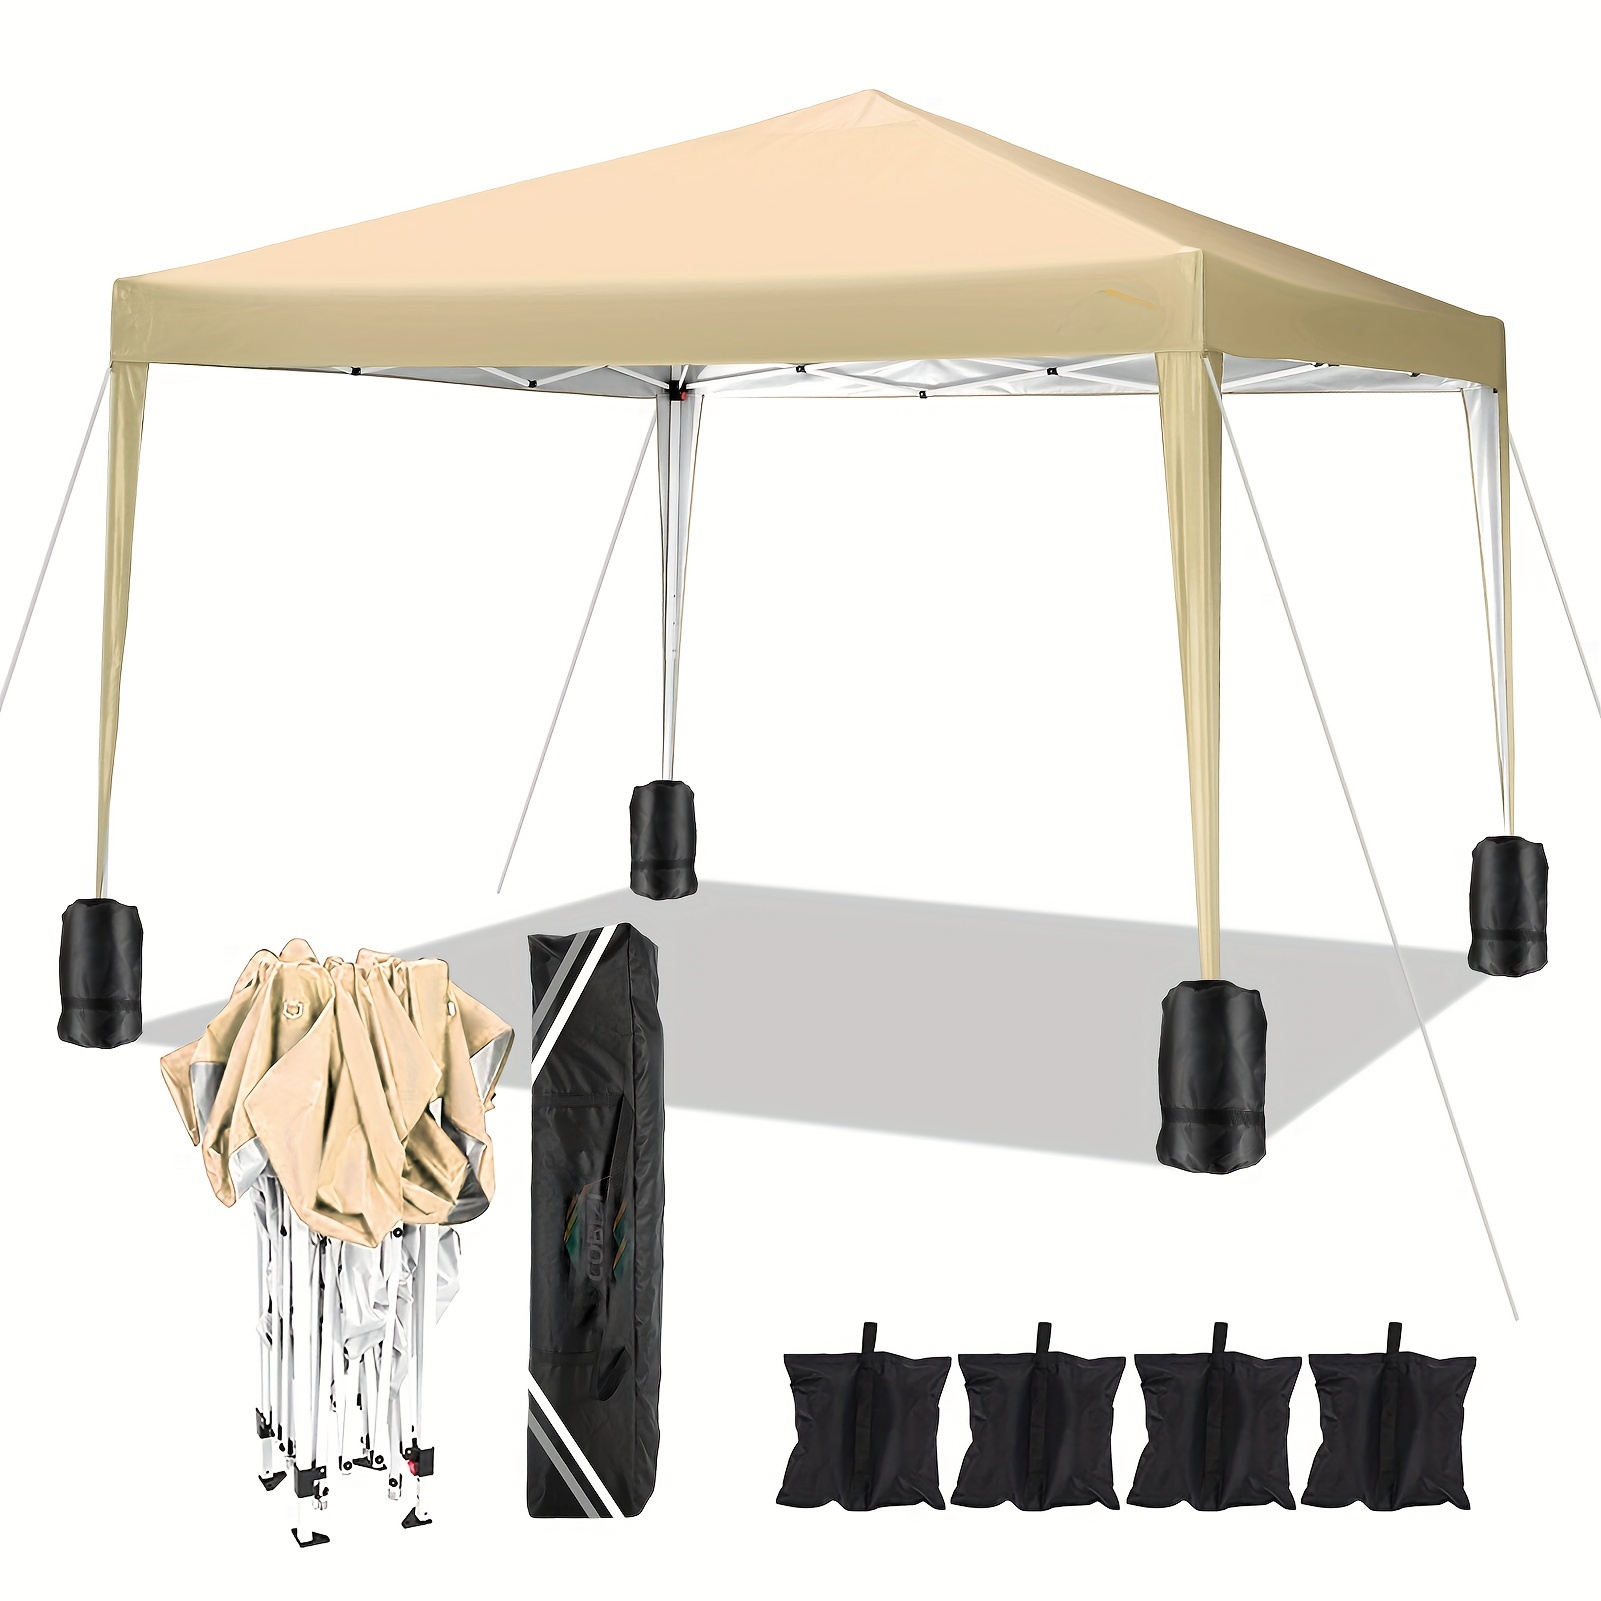 

10x10 Ez Pop Up Canopy Tent With 4 Sidewalls, Upf 50+ Waterproof Instant Portable Canopy With Air Vent, Outdoor Canopy Easy Up Gazebo Shelter For Commercial Sun Shade Garden And Beach